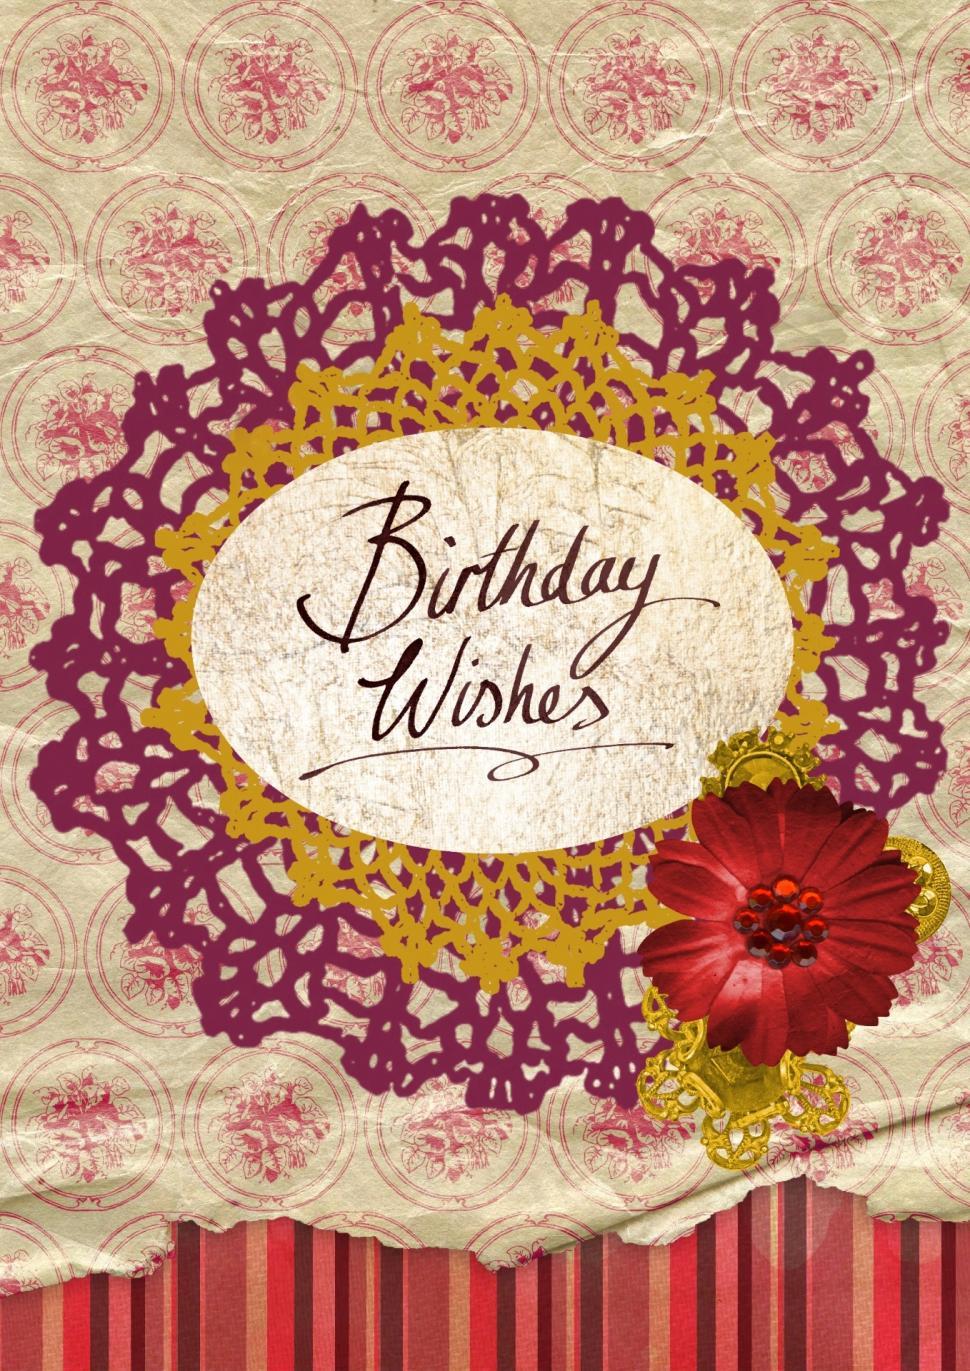 Free Image of Birthday Card With Red Flower 